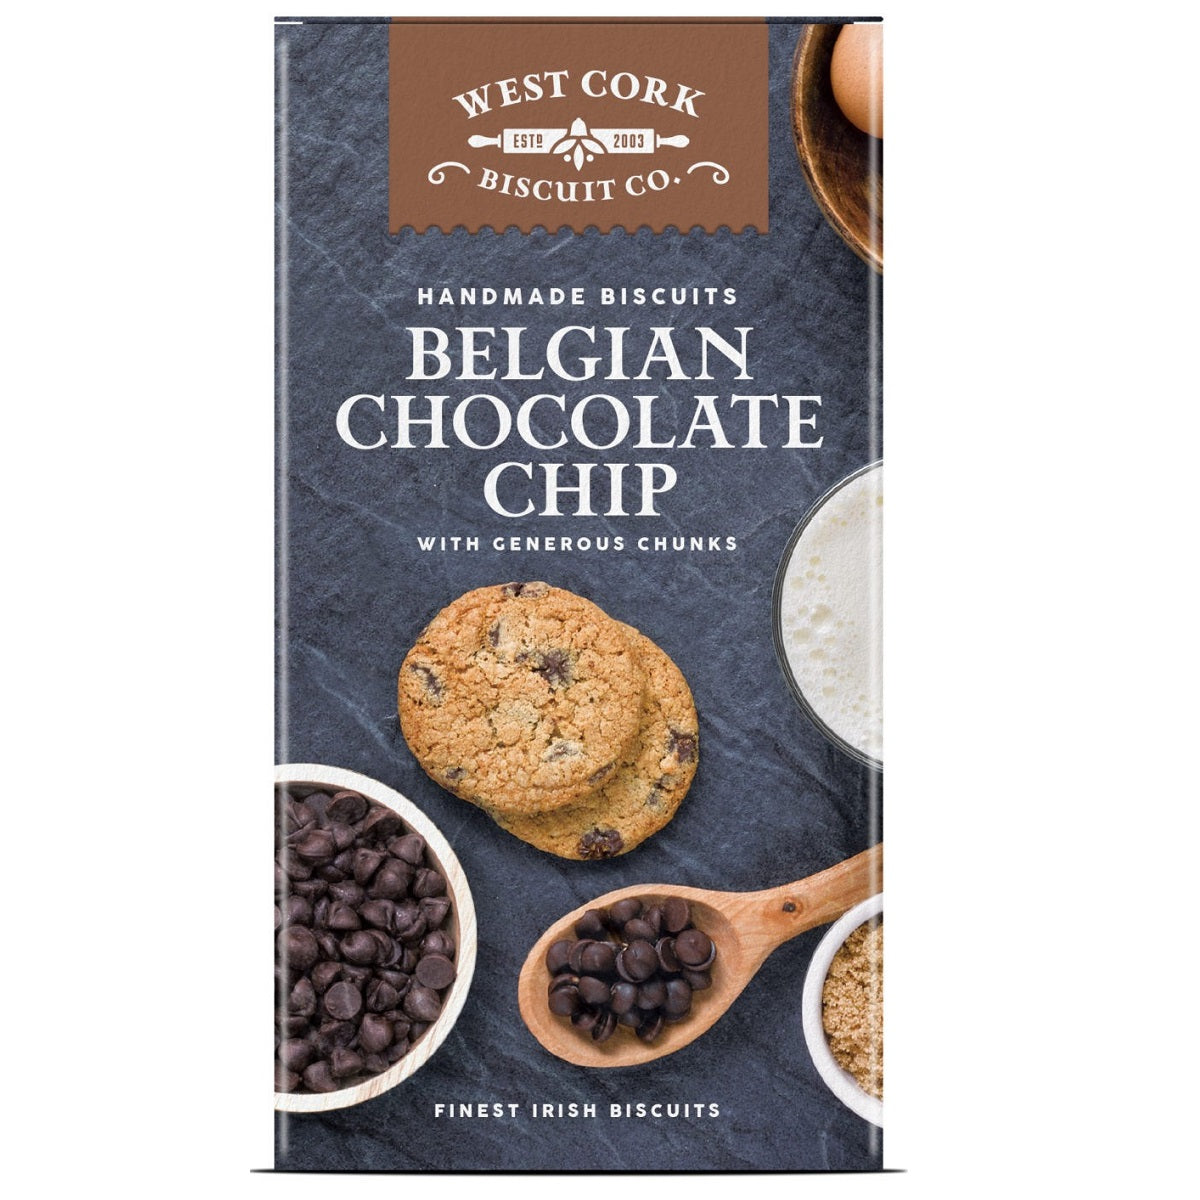 West Cork Biscuit Co Belgian Chocolate Chip with Generous Chunks 185g